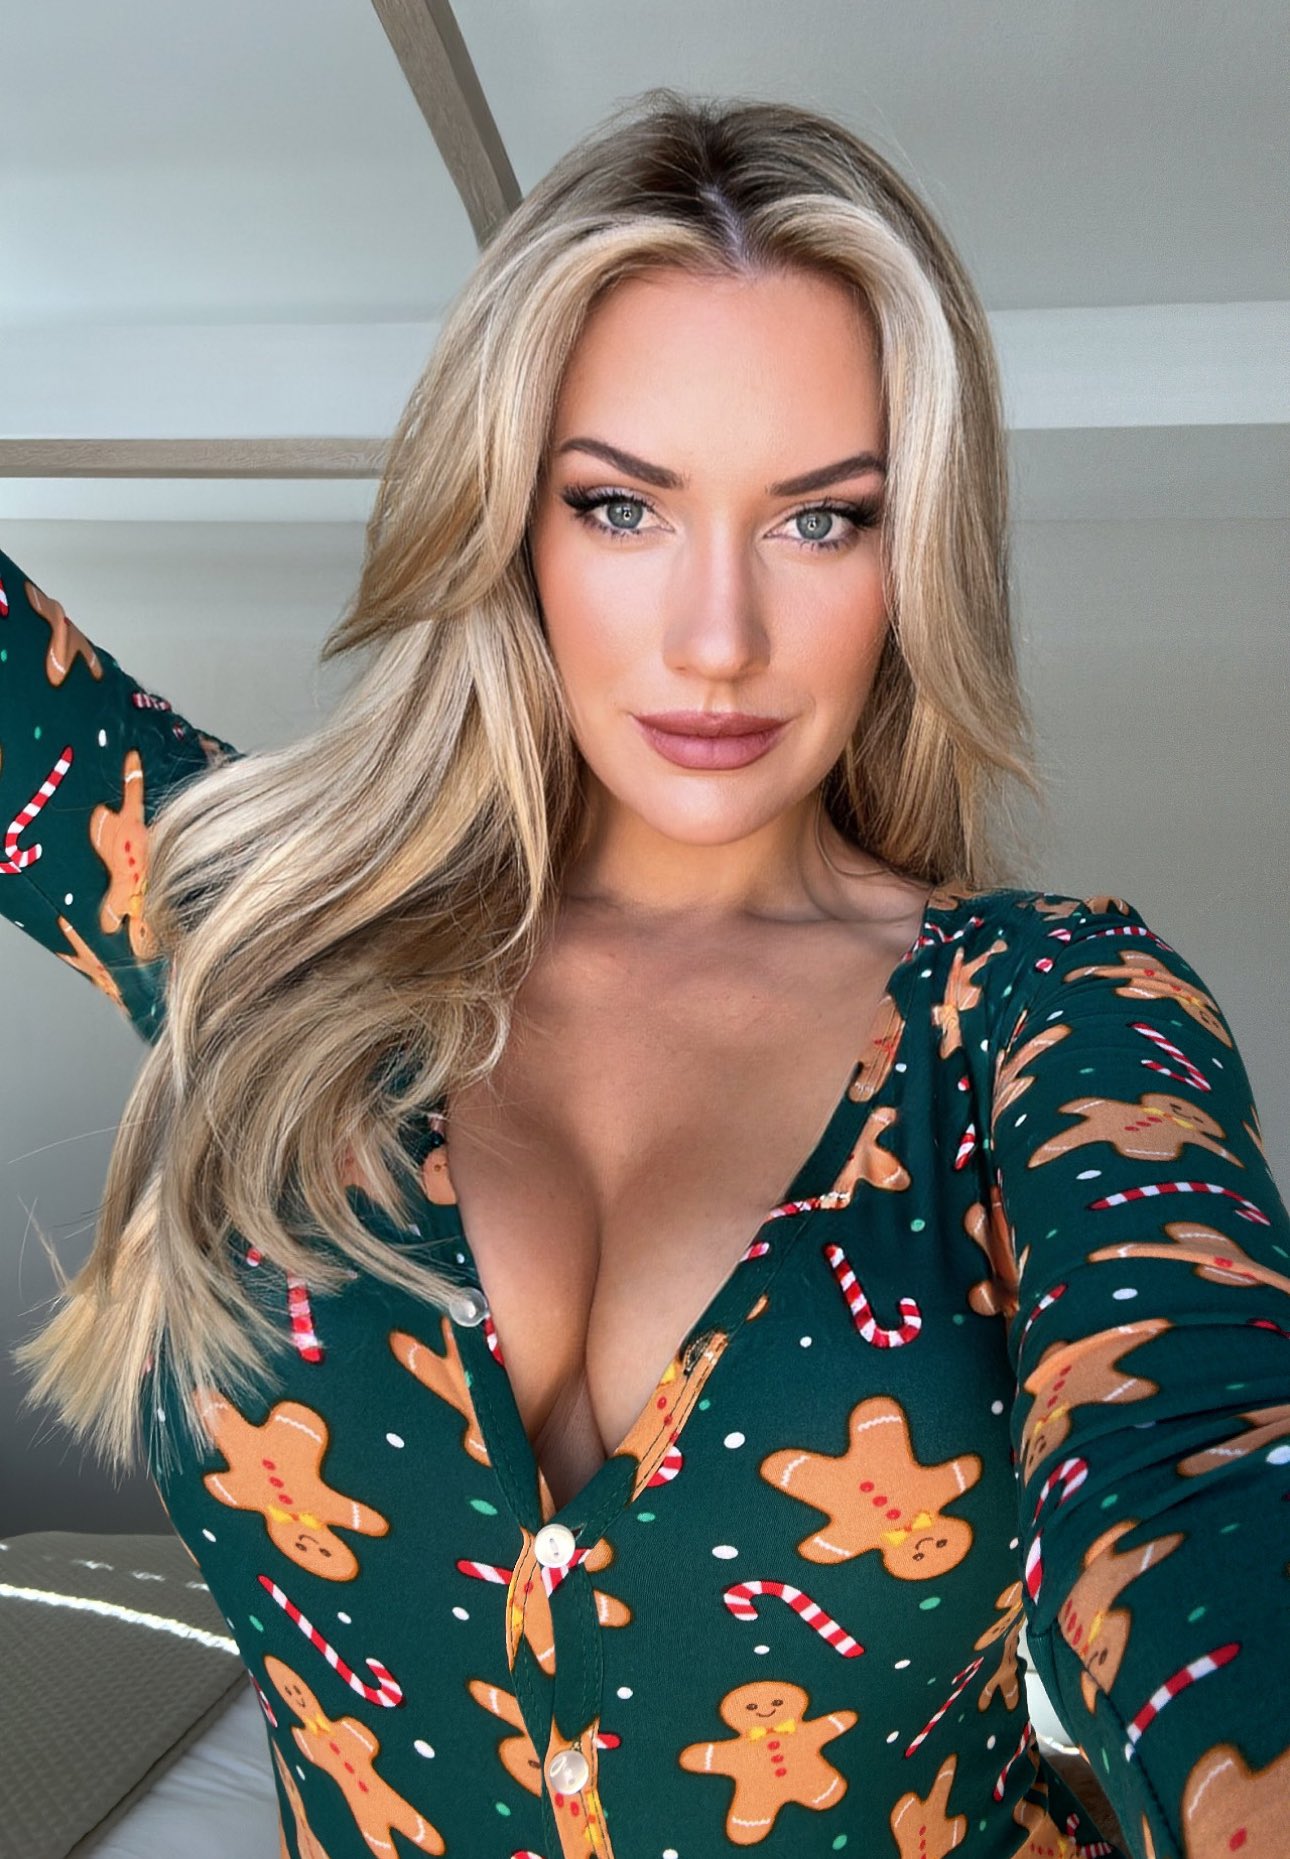 , Paige Spiranac teases Tiger Woods after picture of golf legend ‘taking friend’s Instagram photo’ goes viral